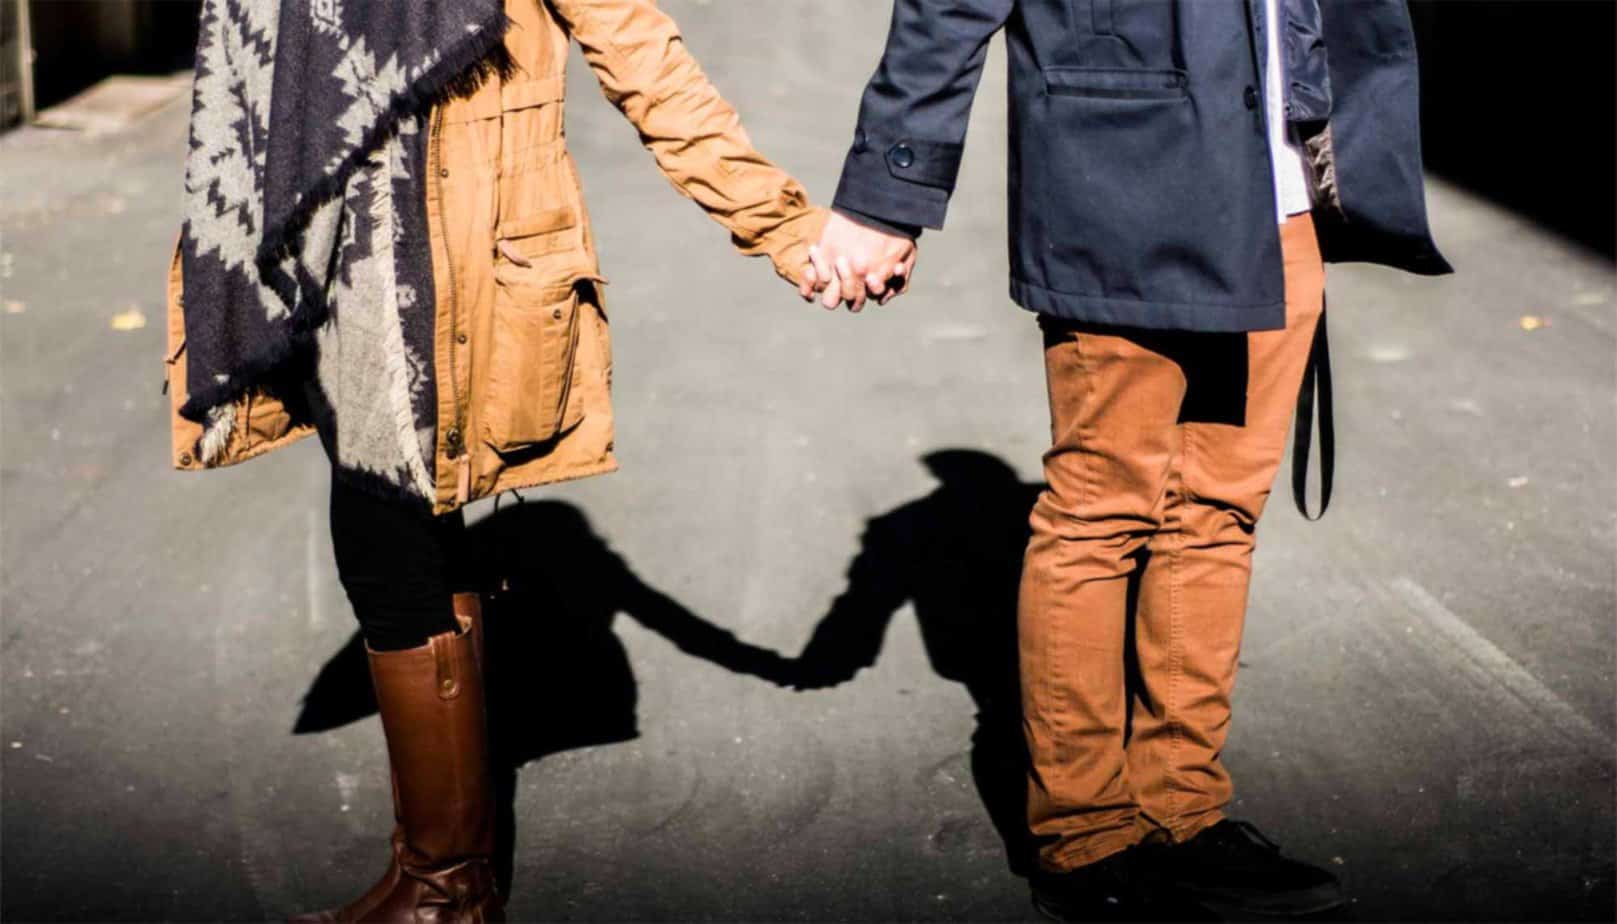 man and woman in brown and blue outfits holding hands on cold day